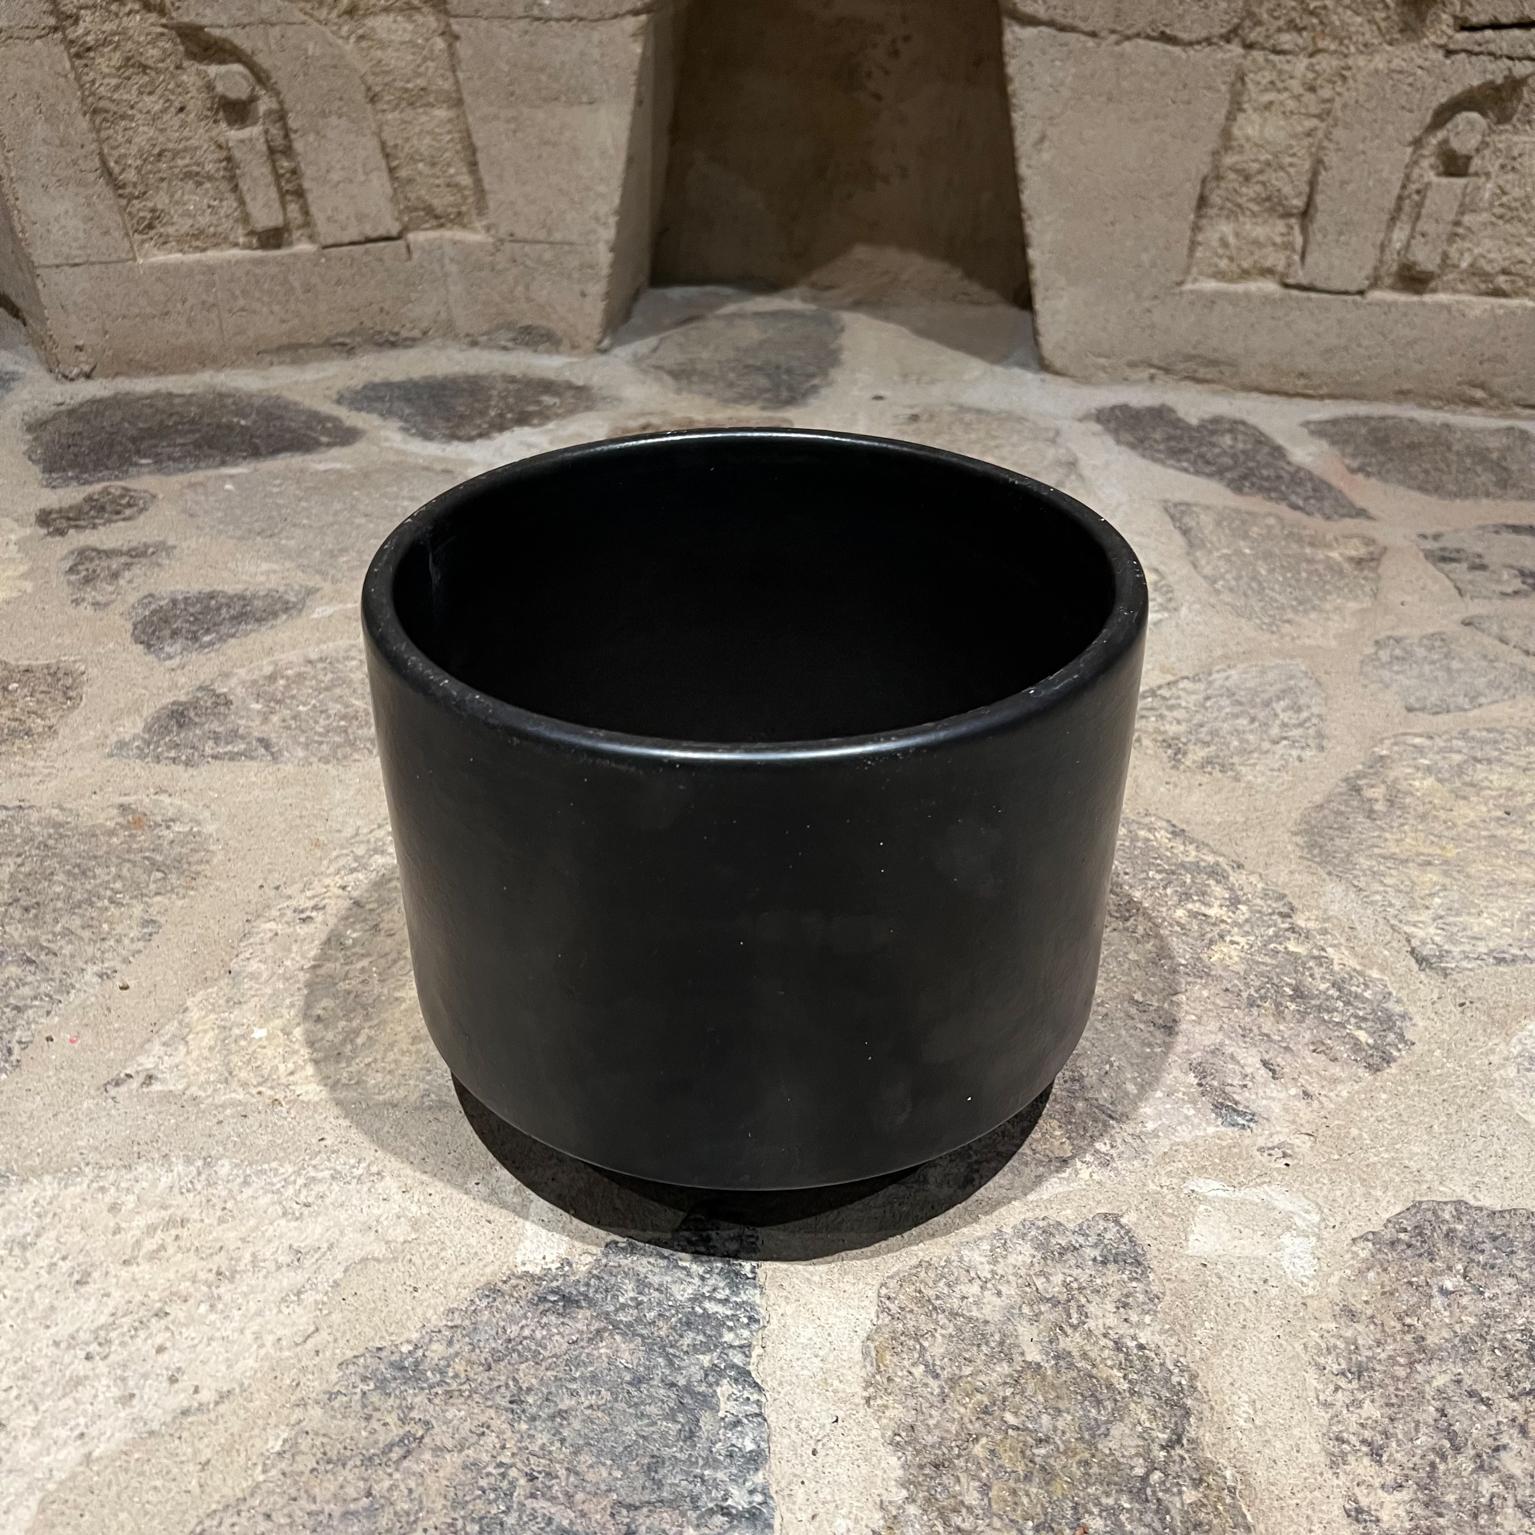 1960s California Modern matte Black Mid Century Architectural planter pot
6.5 tall x 8.25 diameter
Small Black planter garden patio home
In the Style of Gainey Pottery. Signed underneath with label. Hard to read.
Original preowned unrestored